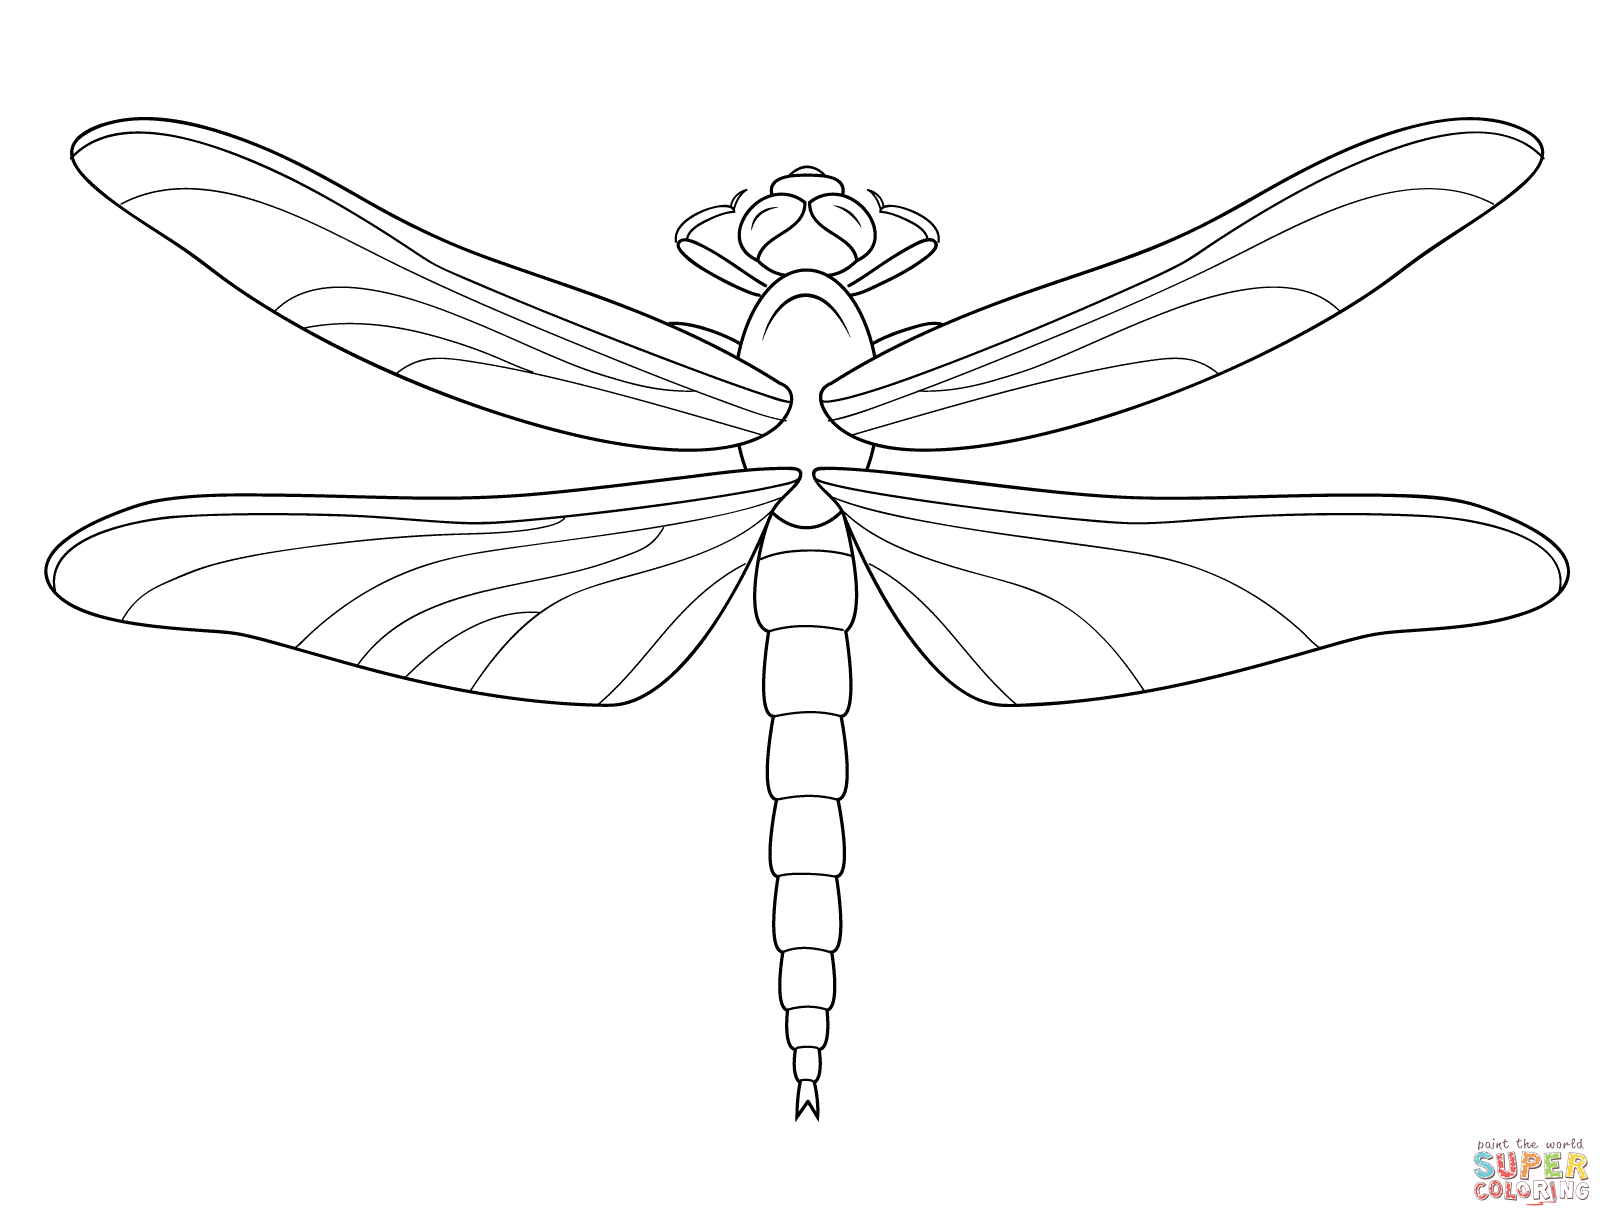 Dragonfly Coloring Page | Free Printable Coloring Pages - Free Printable Pictures Of Dragonflies